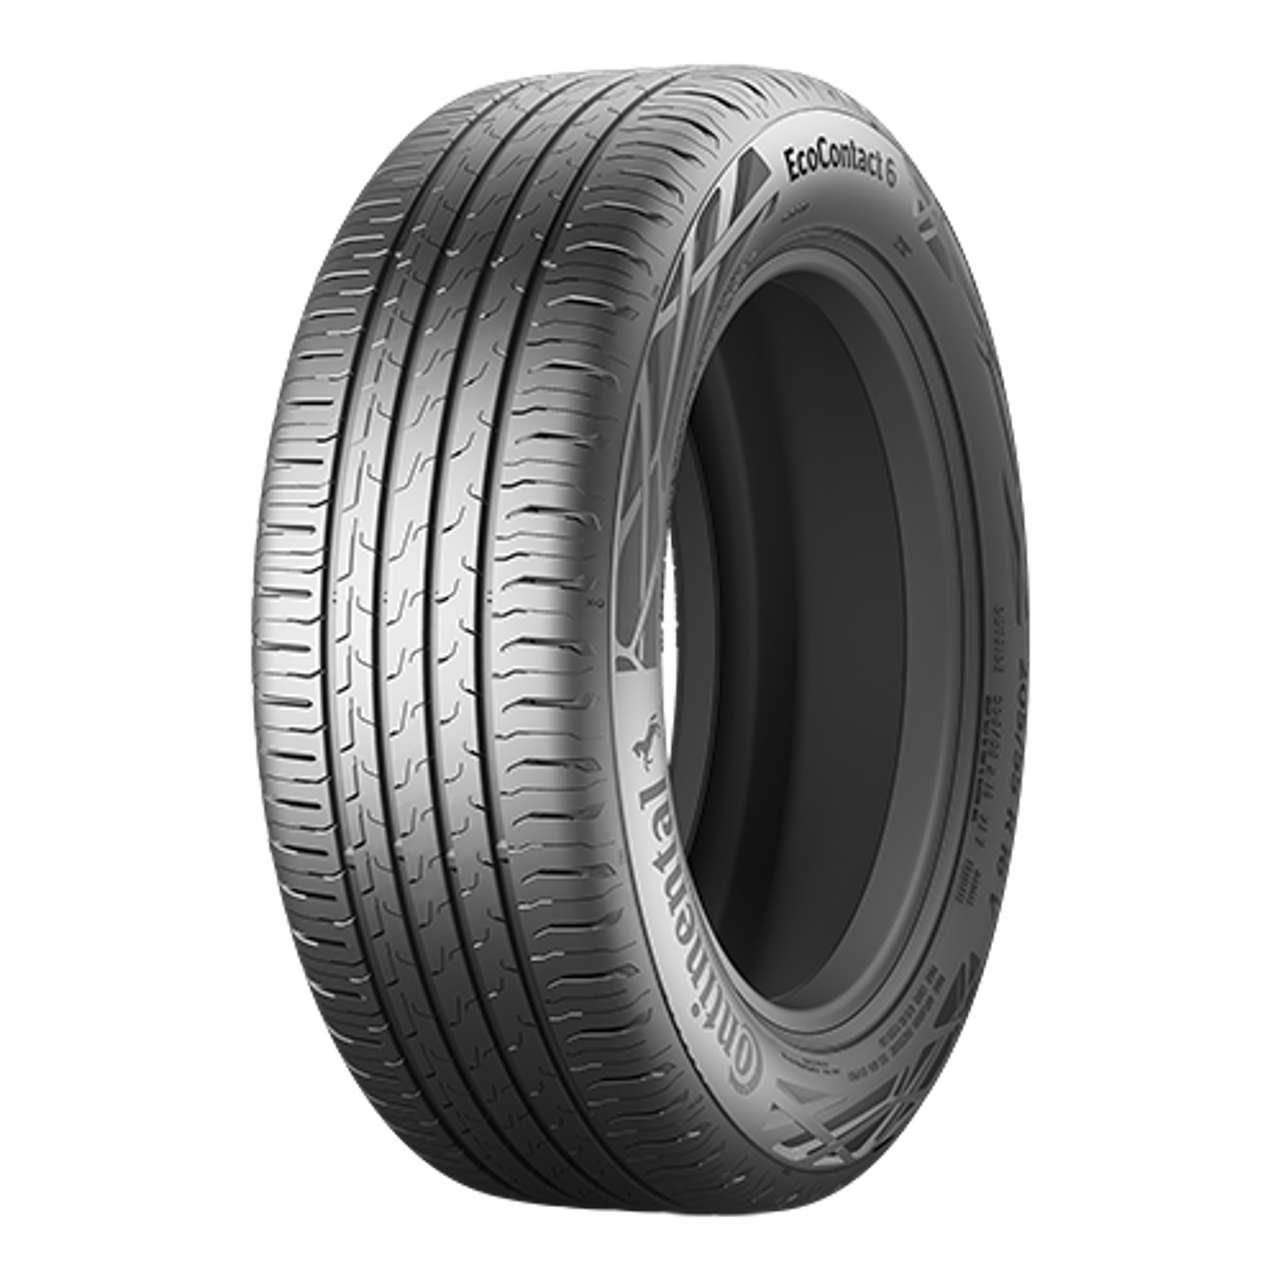 CONTINENTAL ECOCONTACT 6 (EVc) 215/60R16 95V von Continental